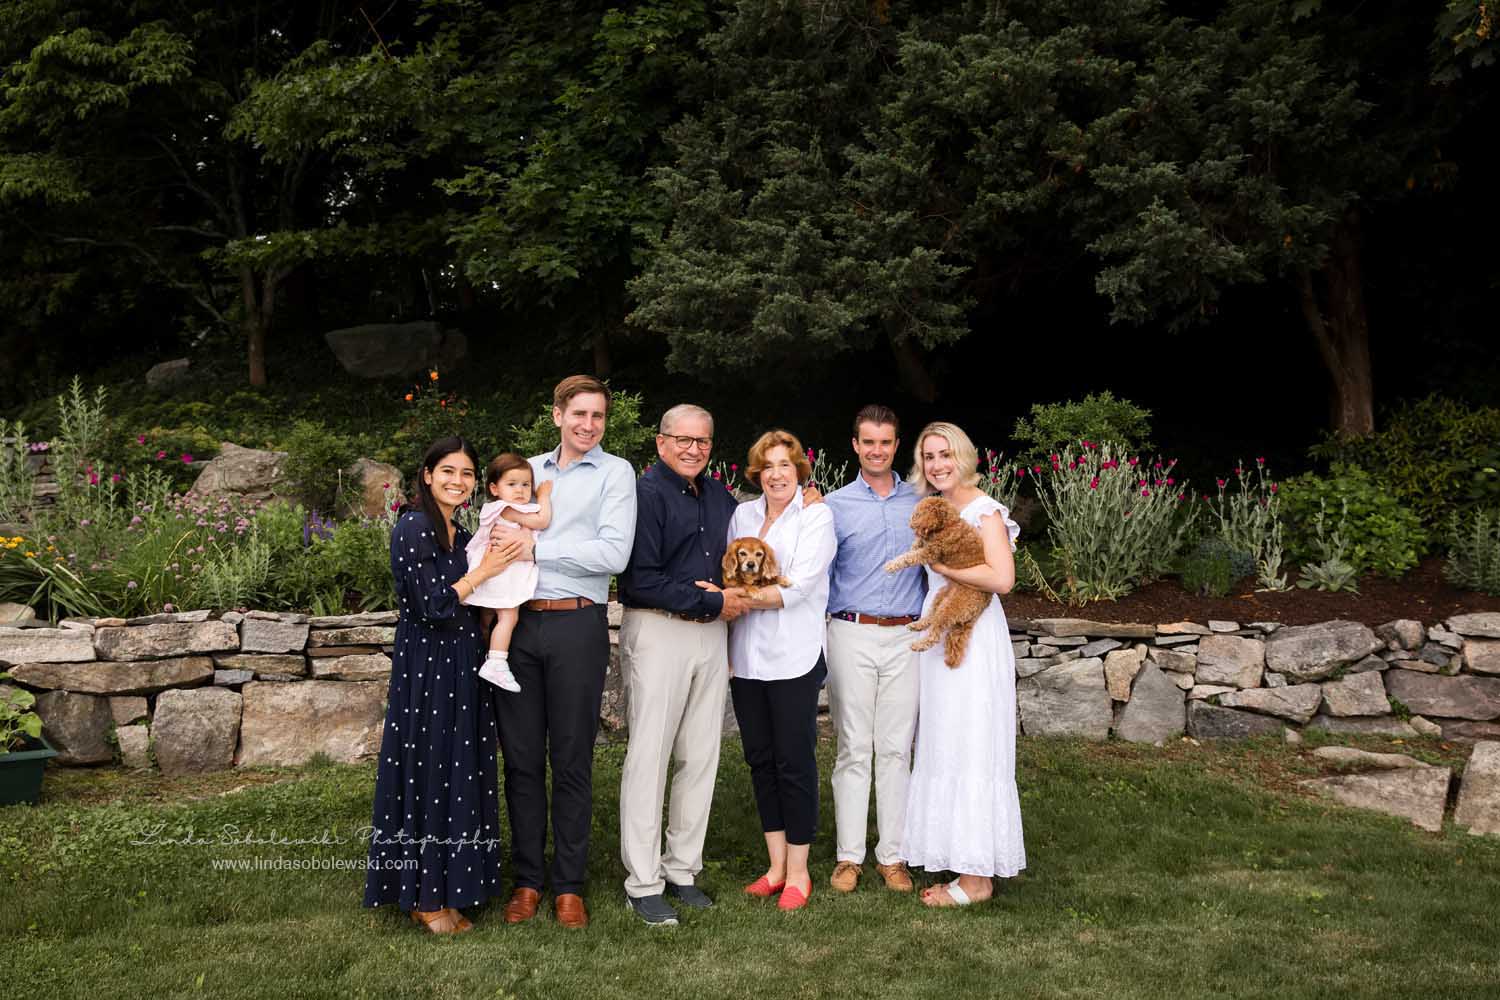 A large family posing together on their lawn, Big Family Photo Shoot, Mystic, CT